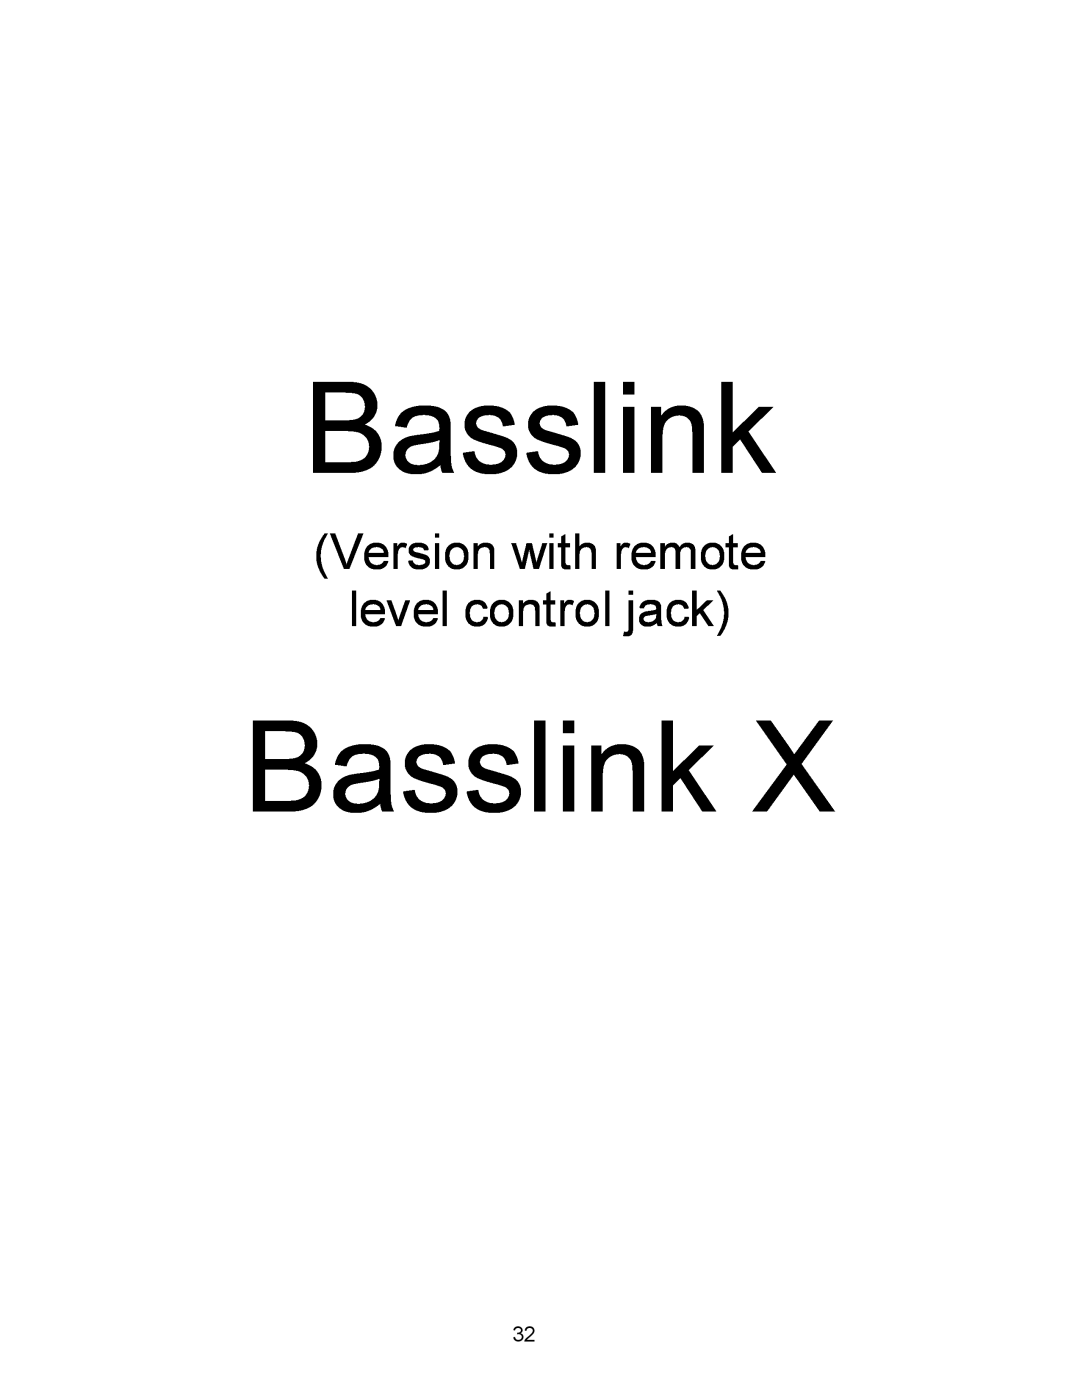 Infinity Bass Link service manual Version with remote level control jack, Basslink 